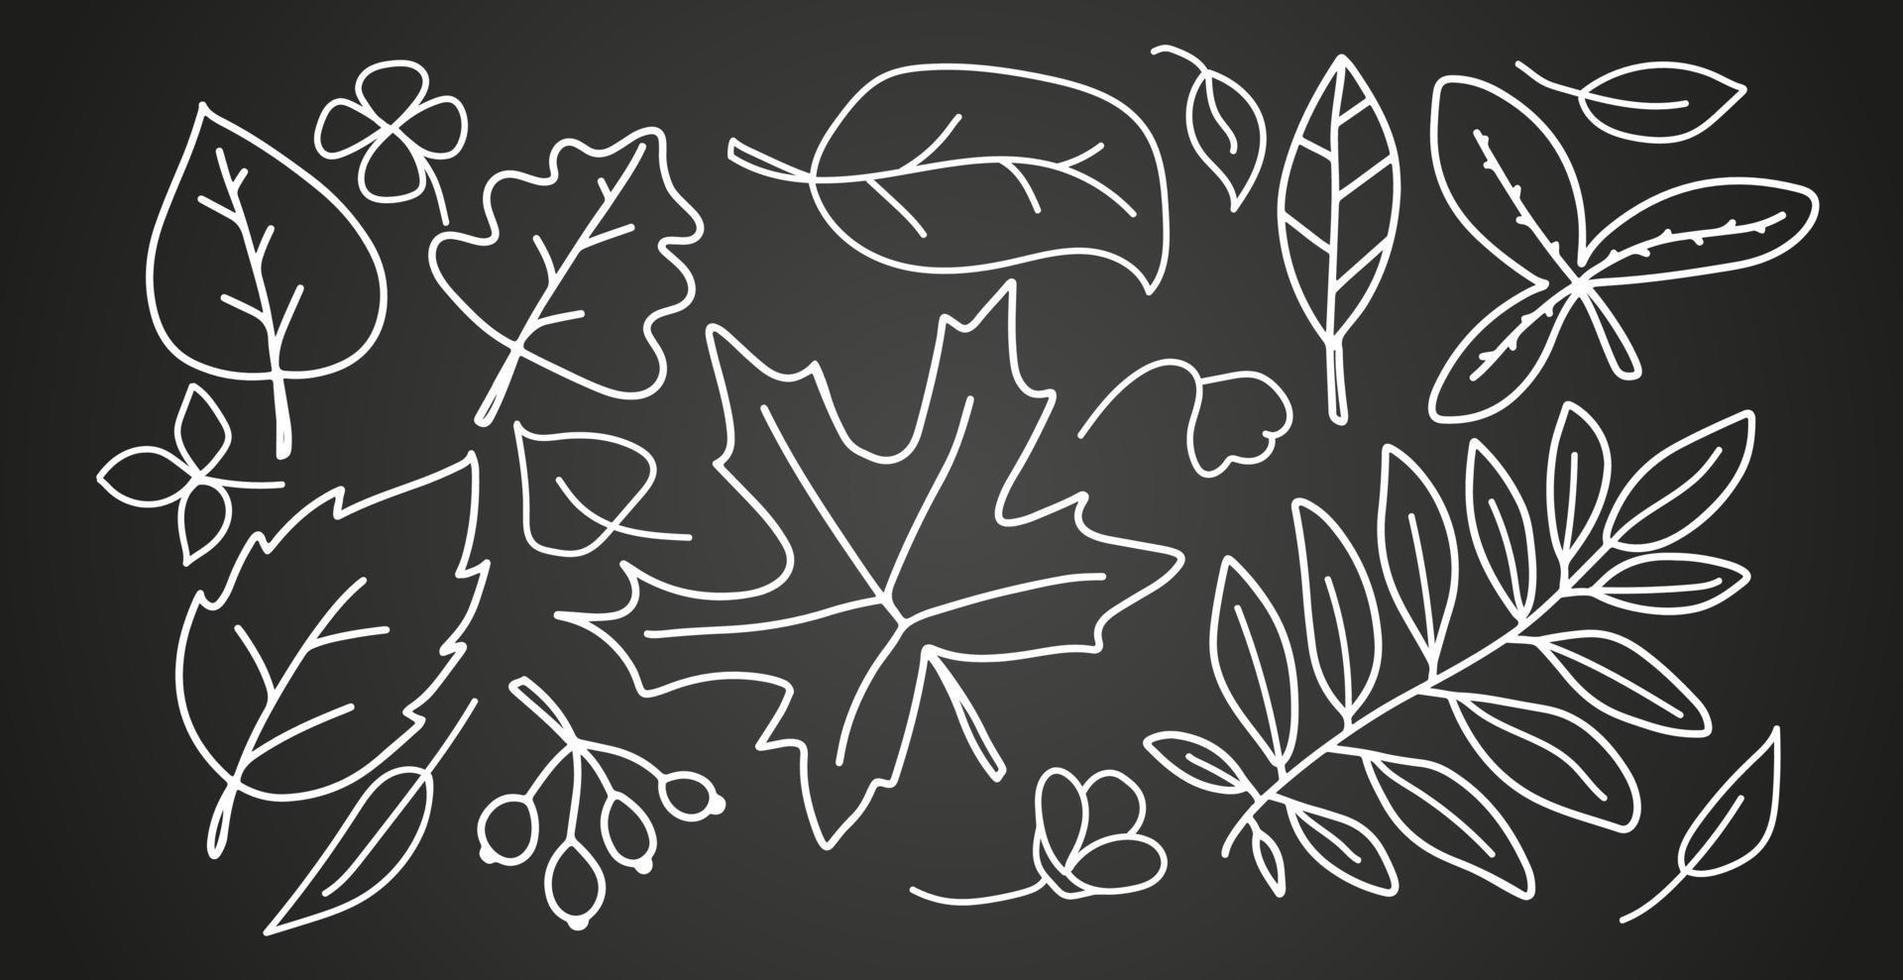 Autumn linear leaves set. Isolated on black background vector illustration. Trees foliage elements for seasonal greeting card designs.